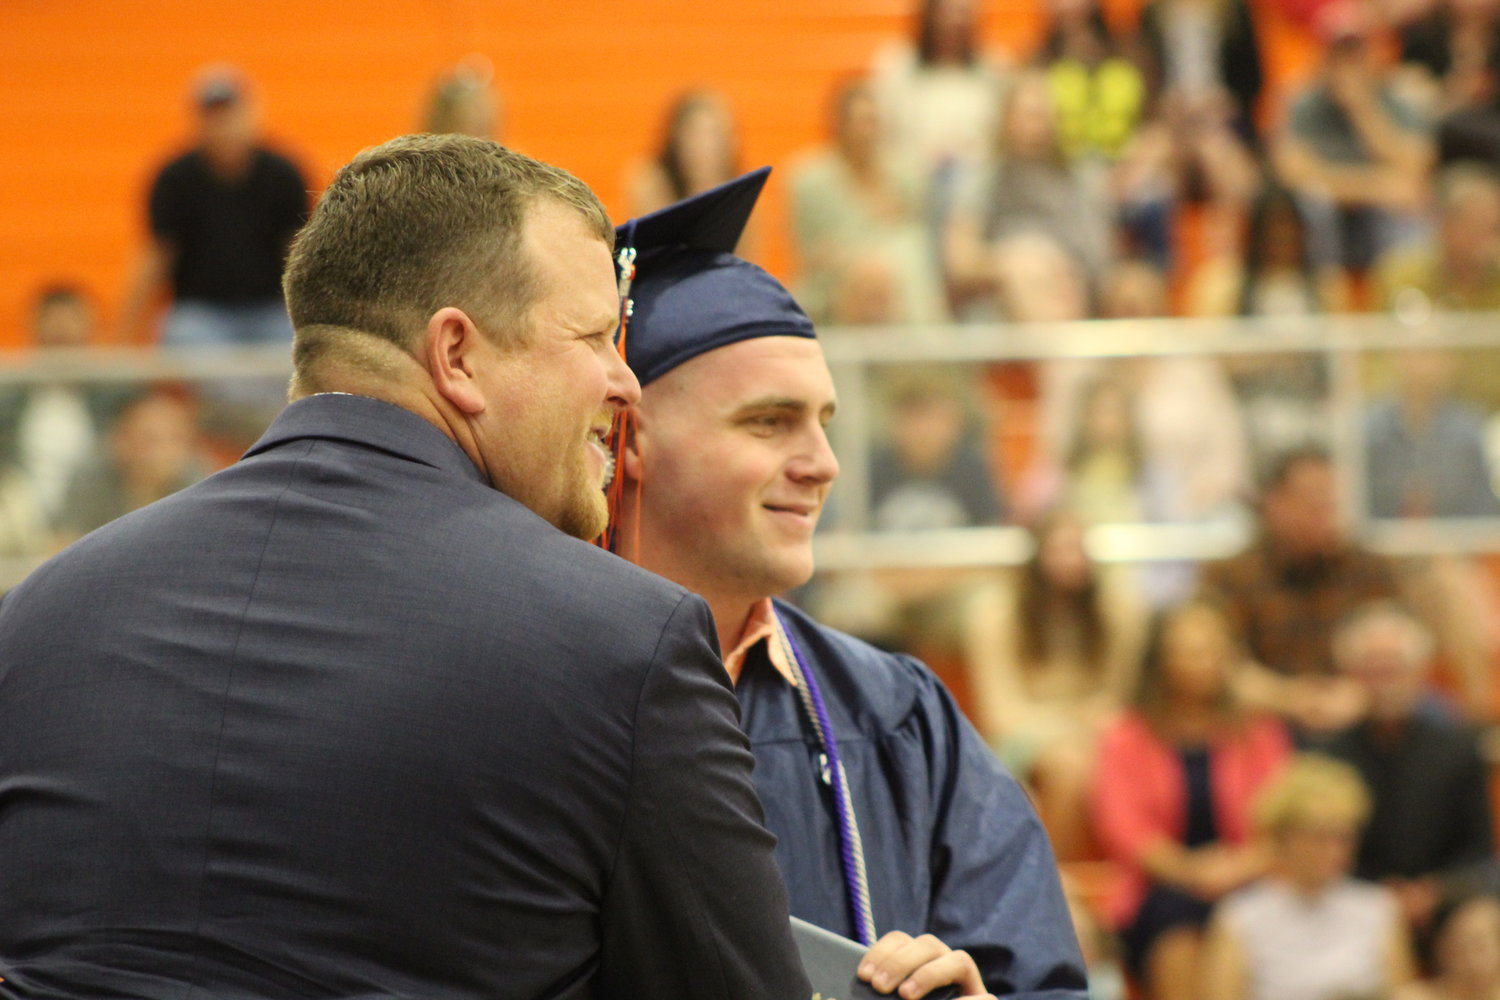 Owen Query stops for a photo after receiving his diploma.